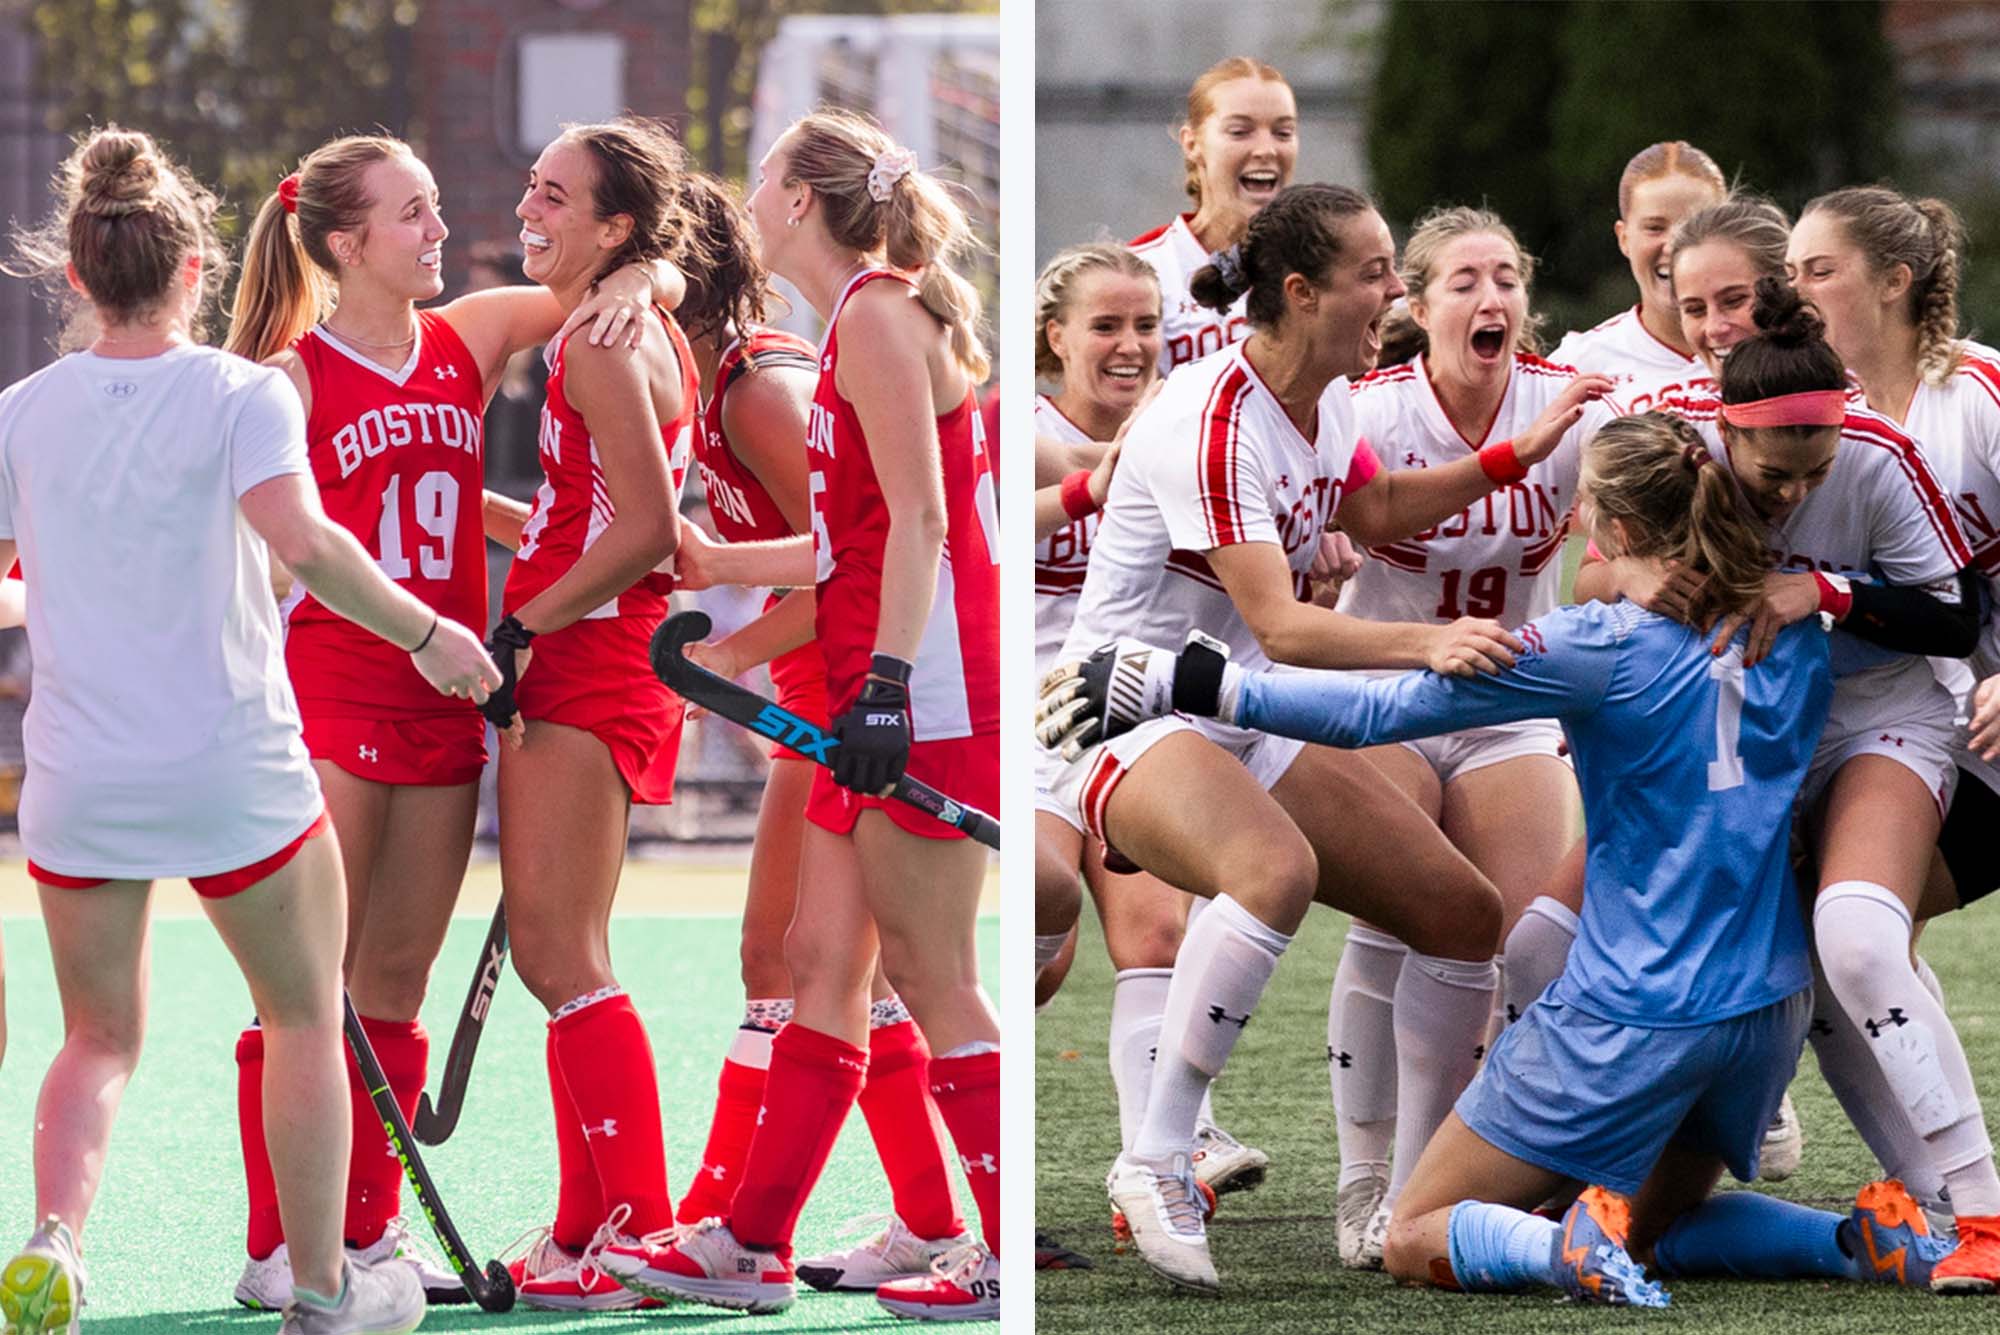 Photo: A composite image of two photos: on the right, a dog pile of the BU women's soccer team in celebration. On the left, four BU field hockey teammates embrace with smiles and celebration.